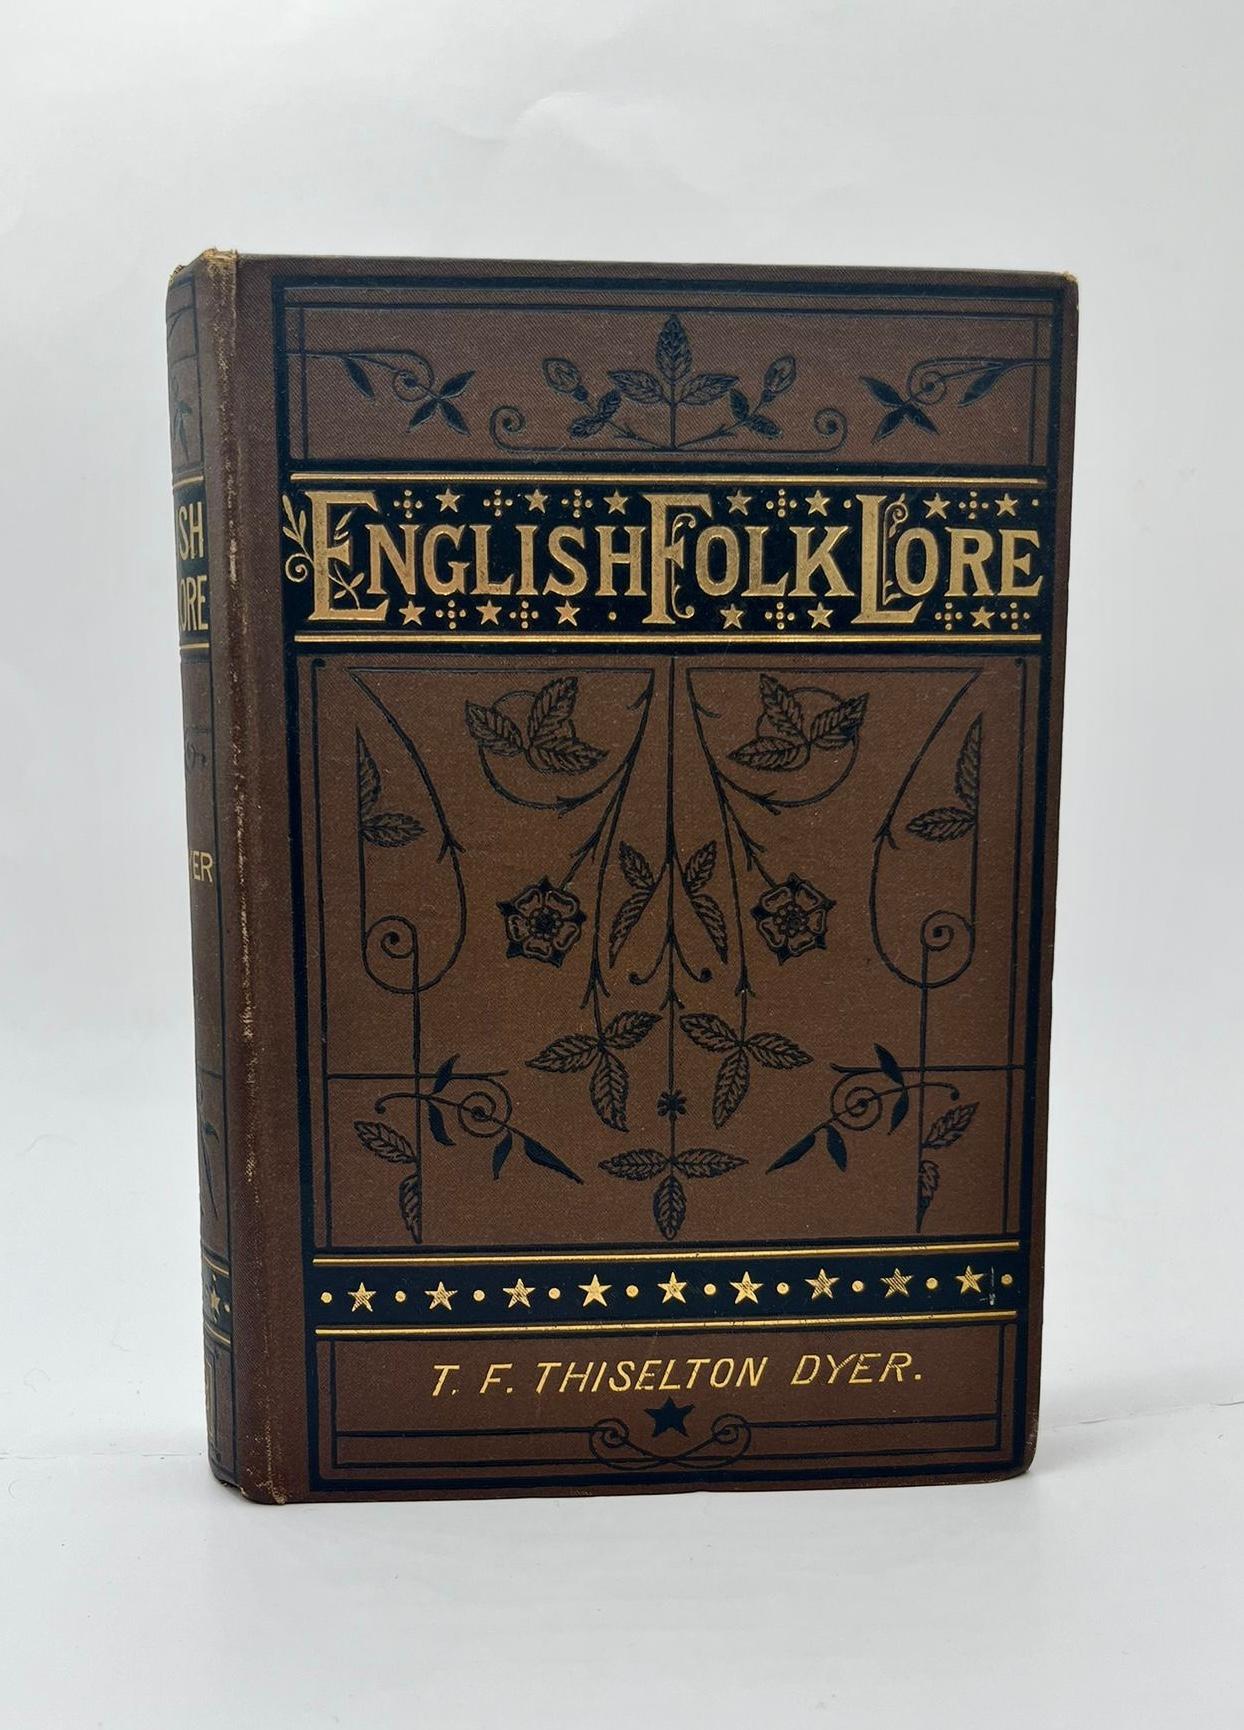 English Folklore by T. F. Thiselton Dyer